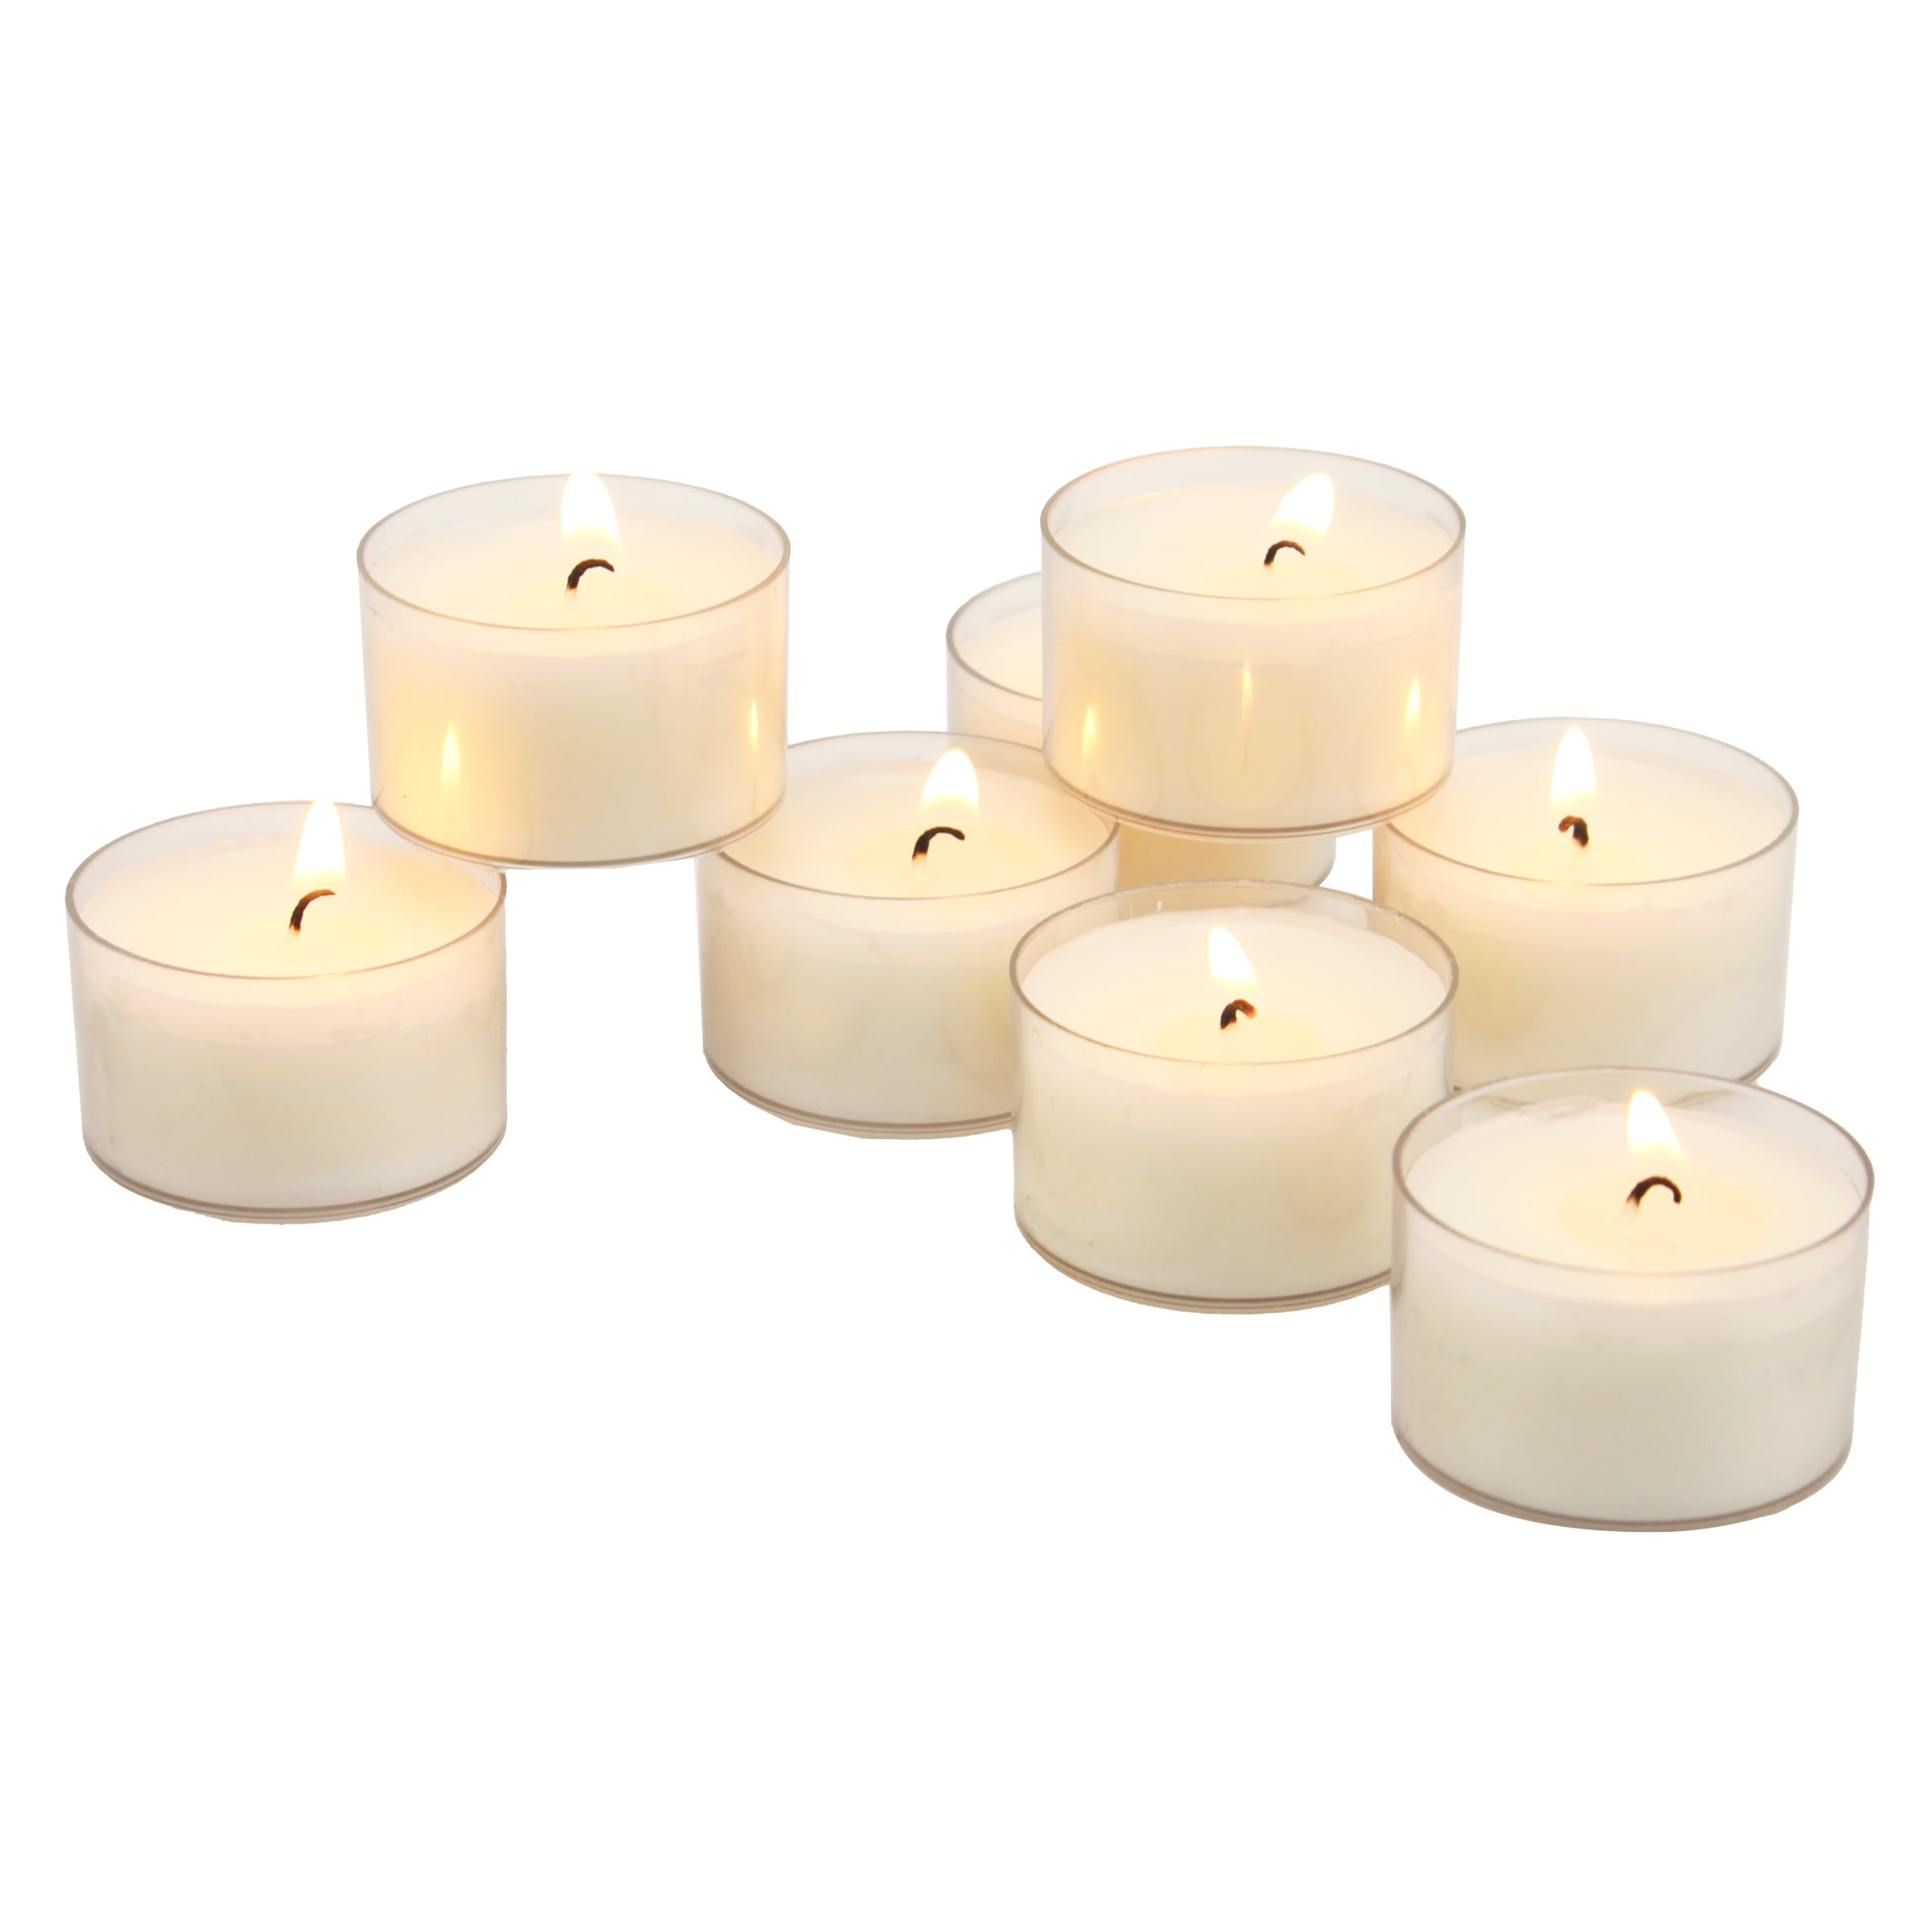 VARIOUS SCENTS,2.5 HOUR BURN TIME FRAGRANCED/SCENTED TEALIGHT CANDLES 